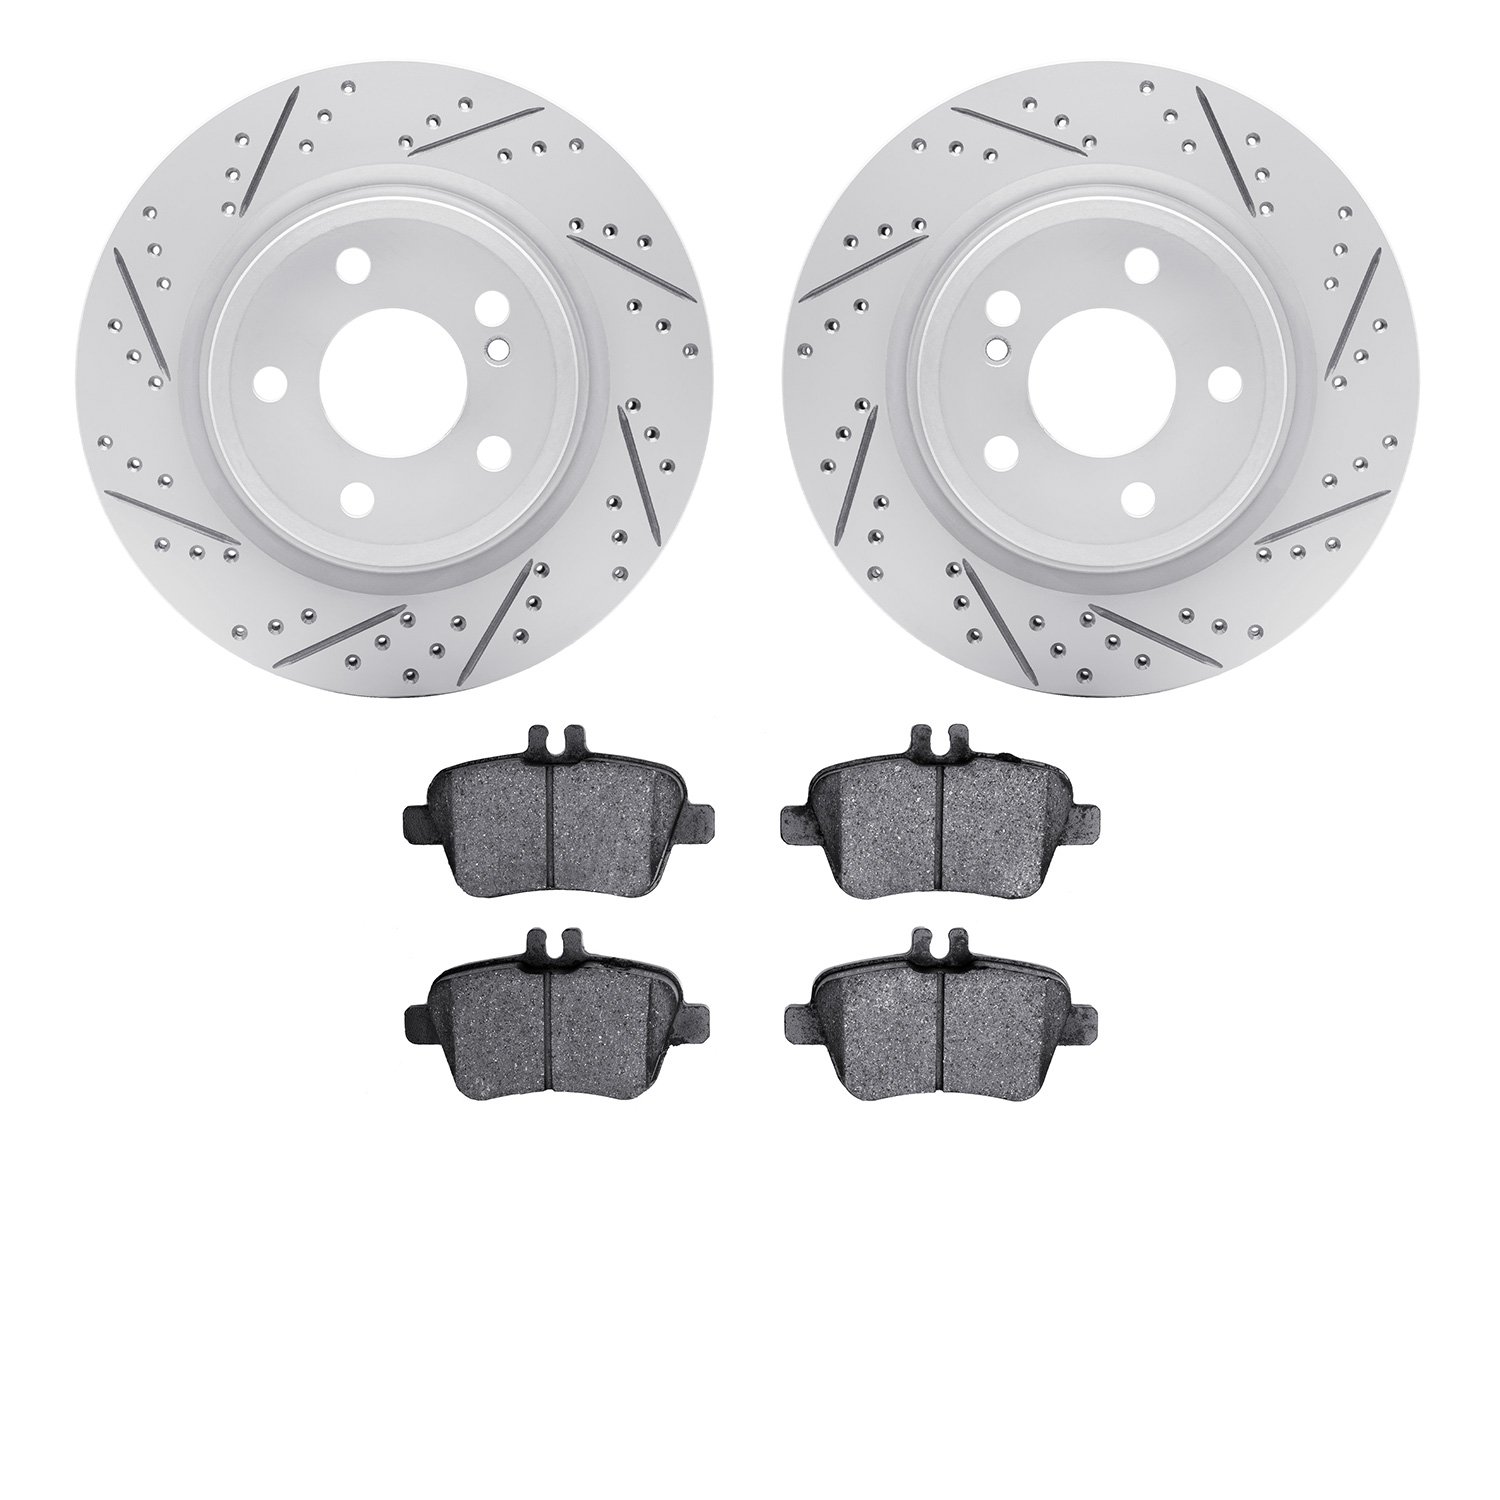 2502-63072 Geoperformance Drilled/Slotted Rotors w/5000 Advanced Brake Pads Kit, 2014-2015 Mercedes-Benz, Position: Rear